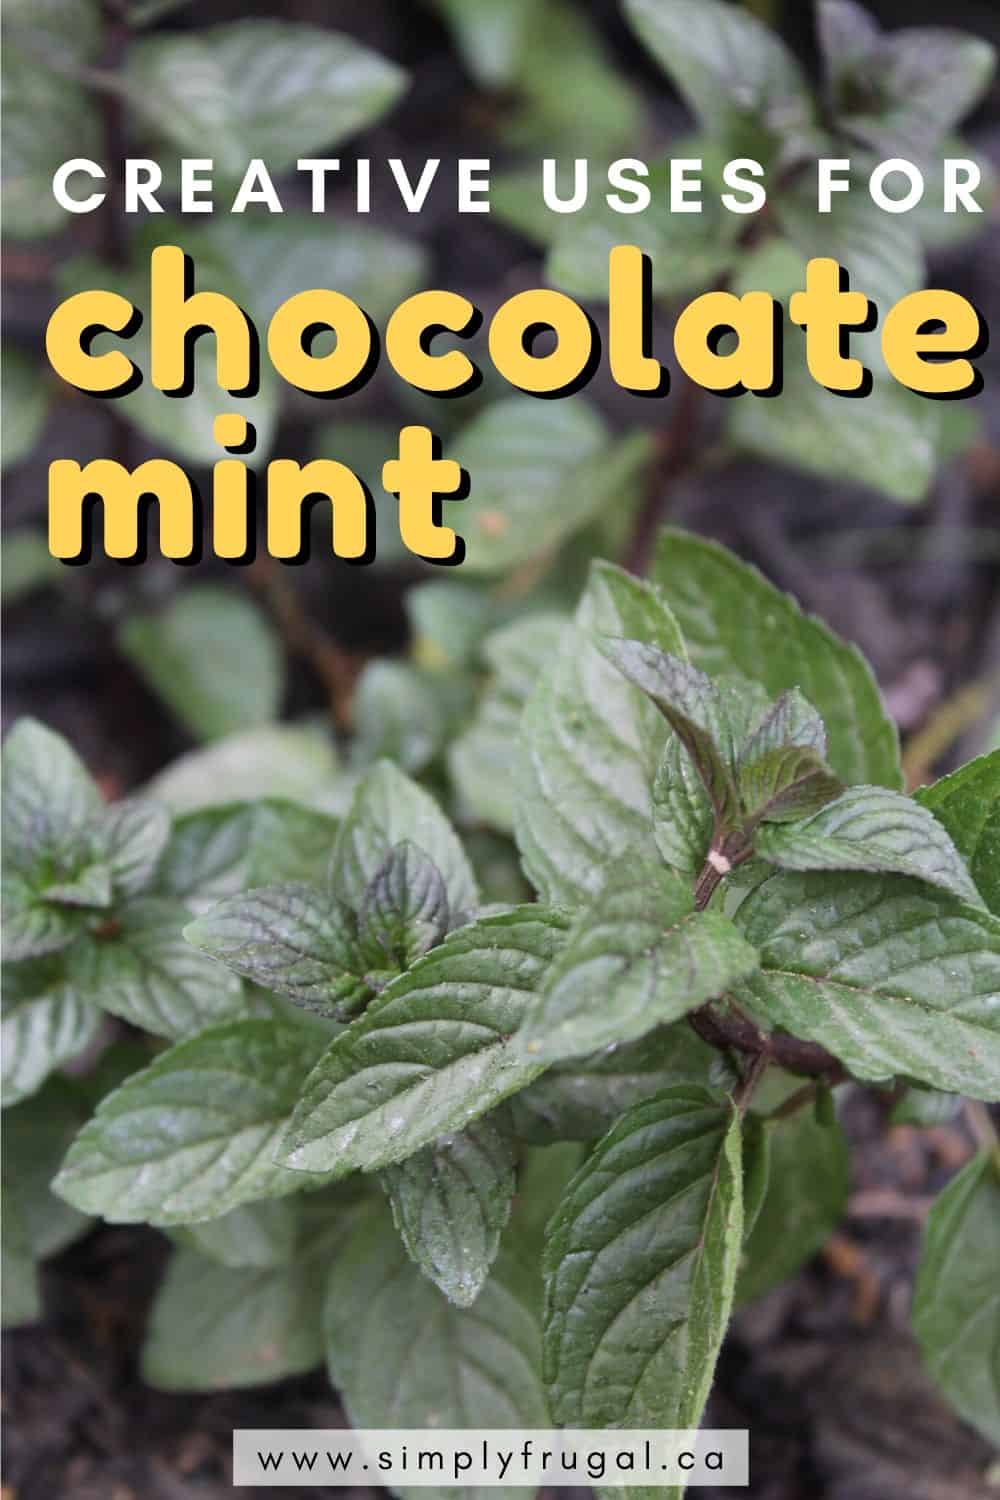 If you grow chocolate mint or are considering it, take a look at these creative uses for chocolate mint that you must try! #herbs #gardening #grow